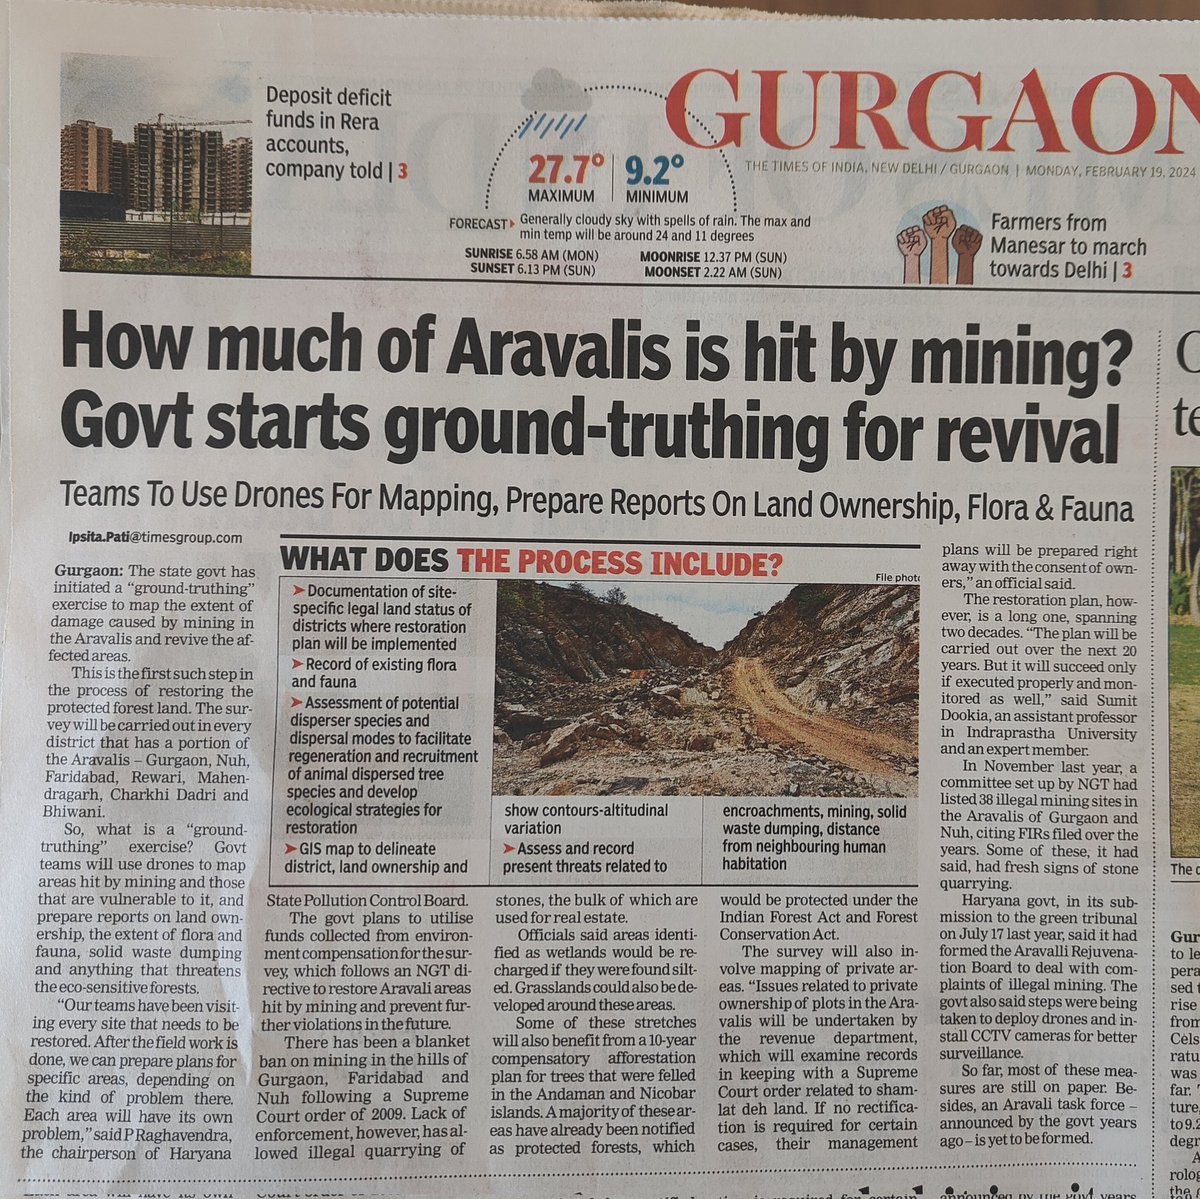 There has been a blanket ban on mining in the hills of Gurgaon, Faridabad and Nuh following a SC order. Lack of enforcement has allowed illegal quarrying of stones, the bulk of which are used for real estate @rahuulchoudhary Read the full story here toi.in/dcdMMY